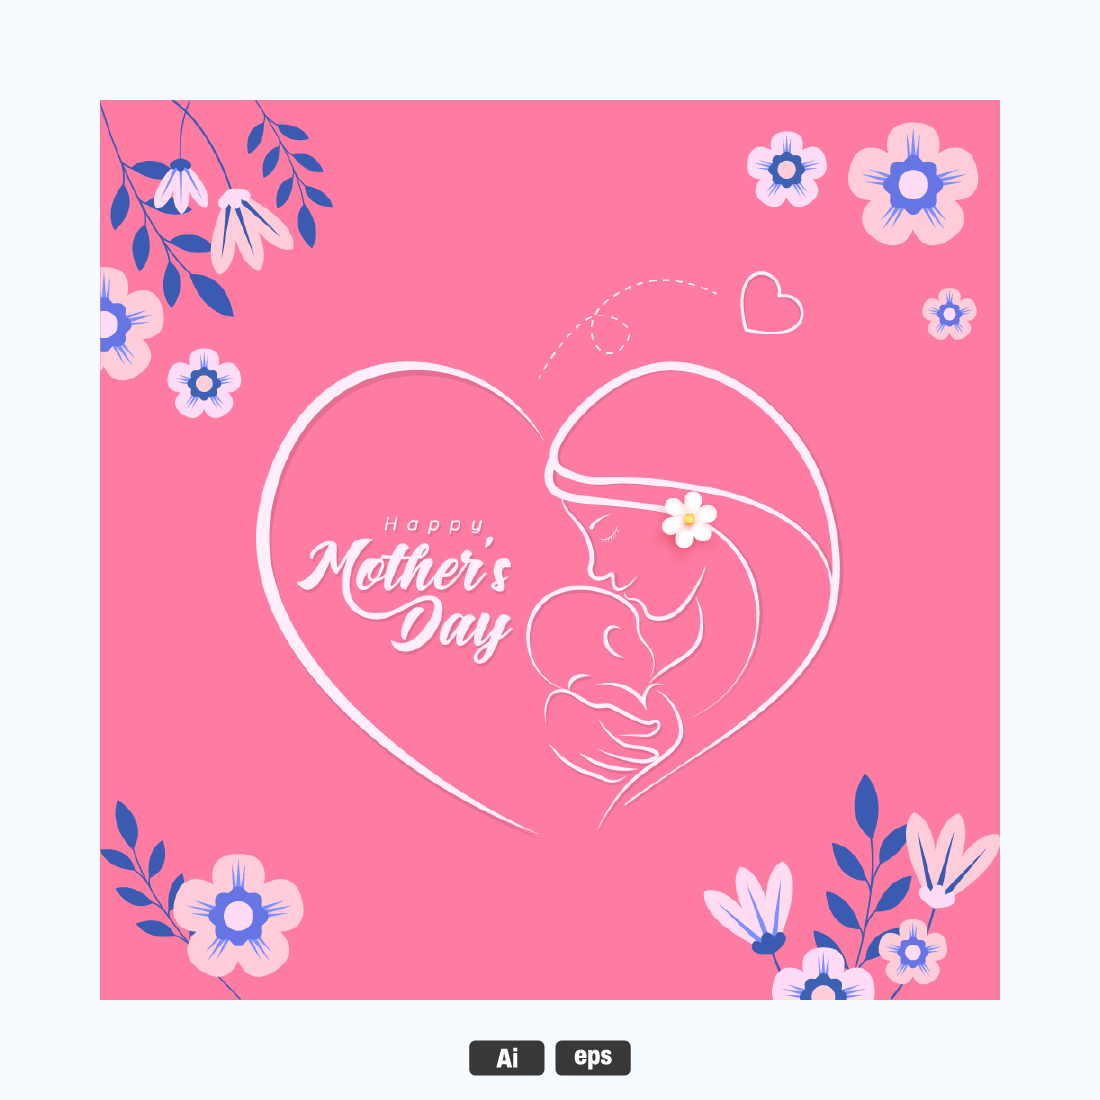 Mother's Days social media banner preview image.